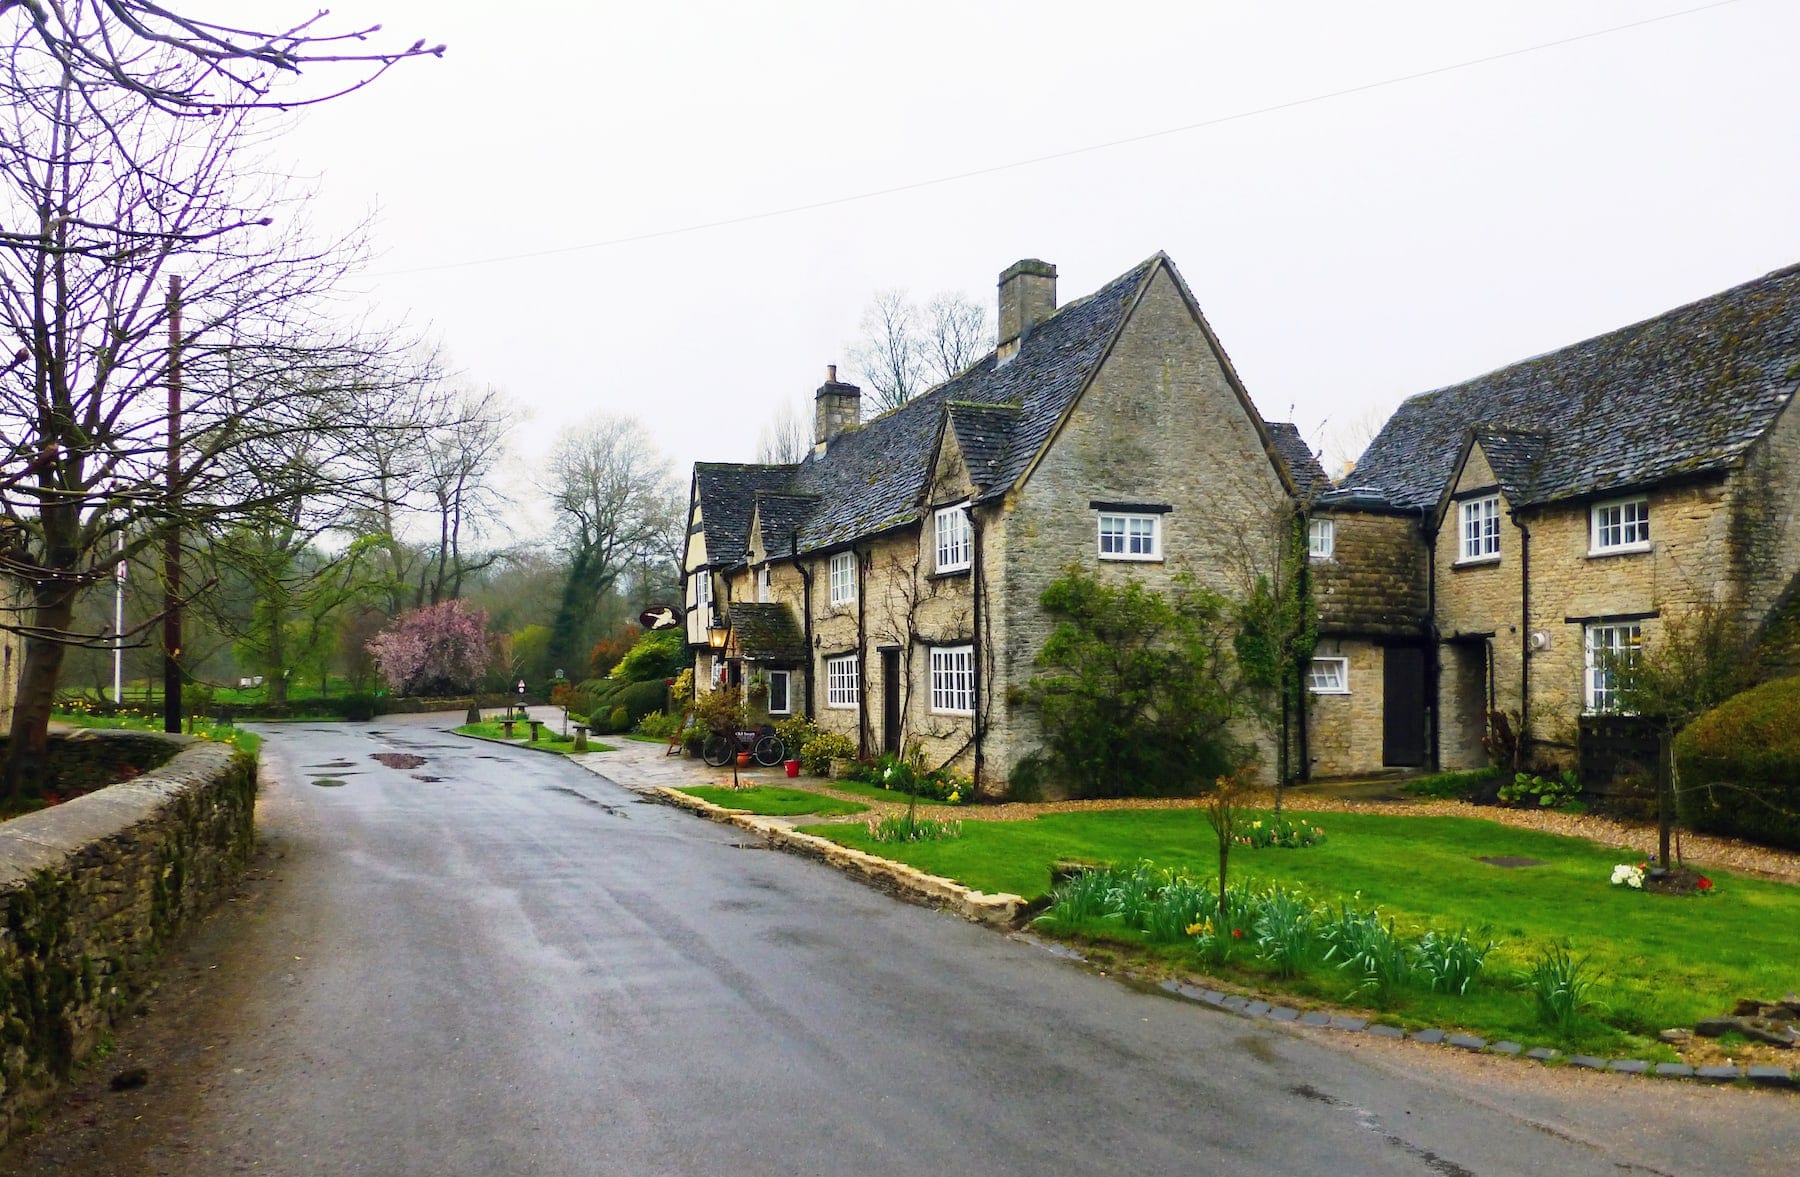 The Charming Cotswolds